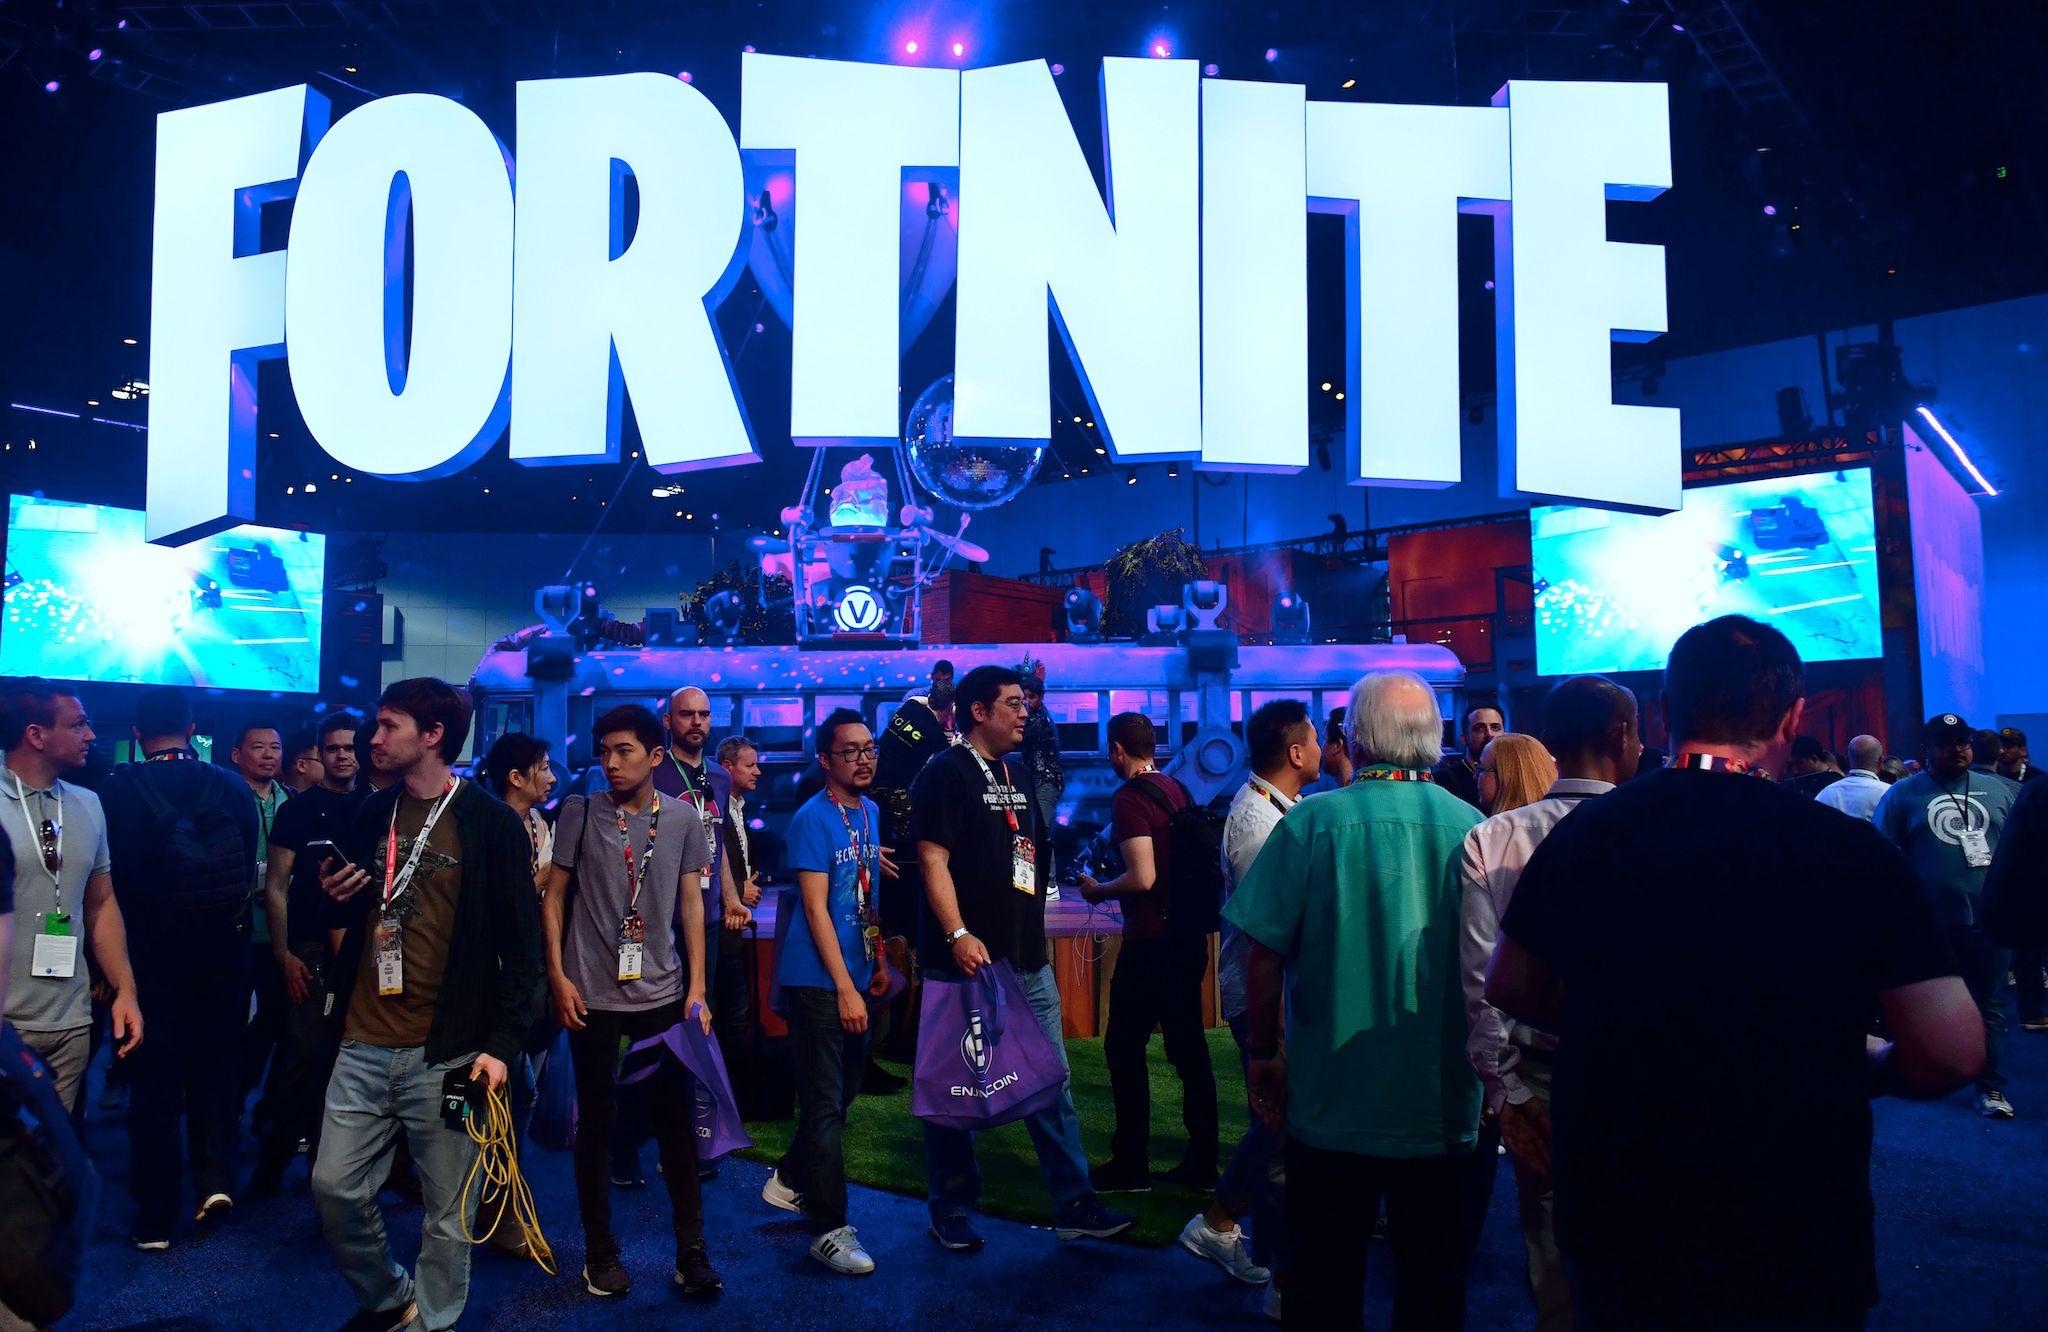 People crowd the display area for the survival game Fortnite at the 24th Electronic Expo, or E3 2018, in Los Angeles, California on on June 12, 2018